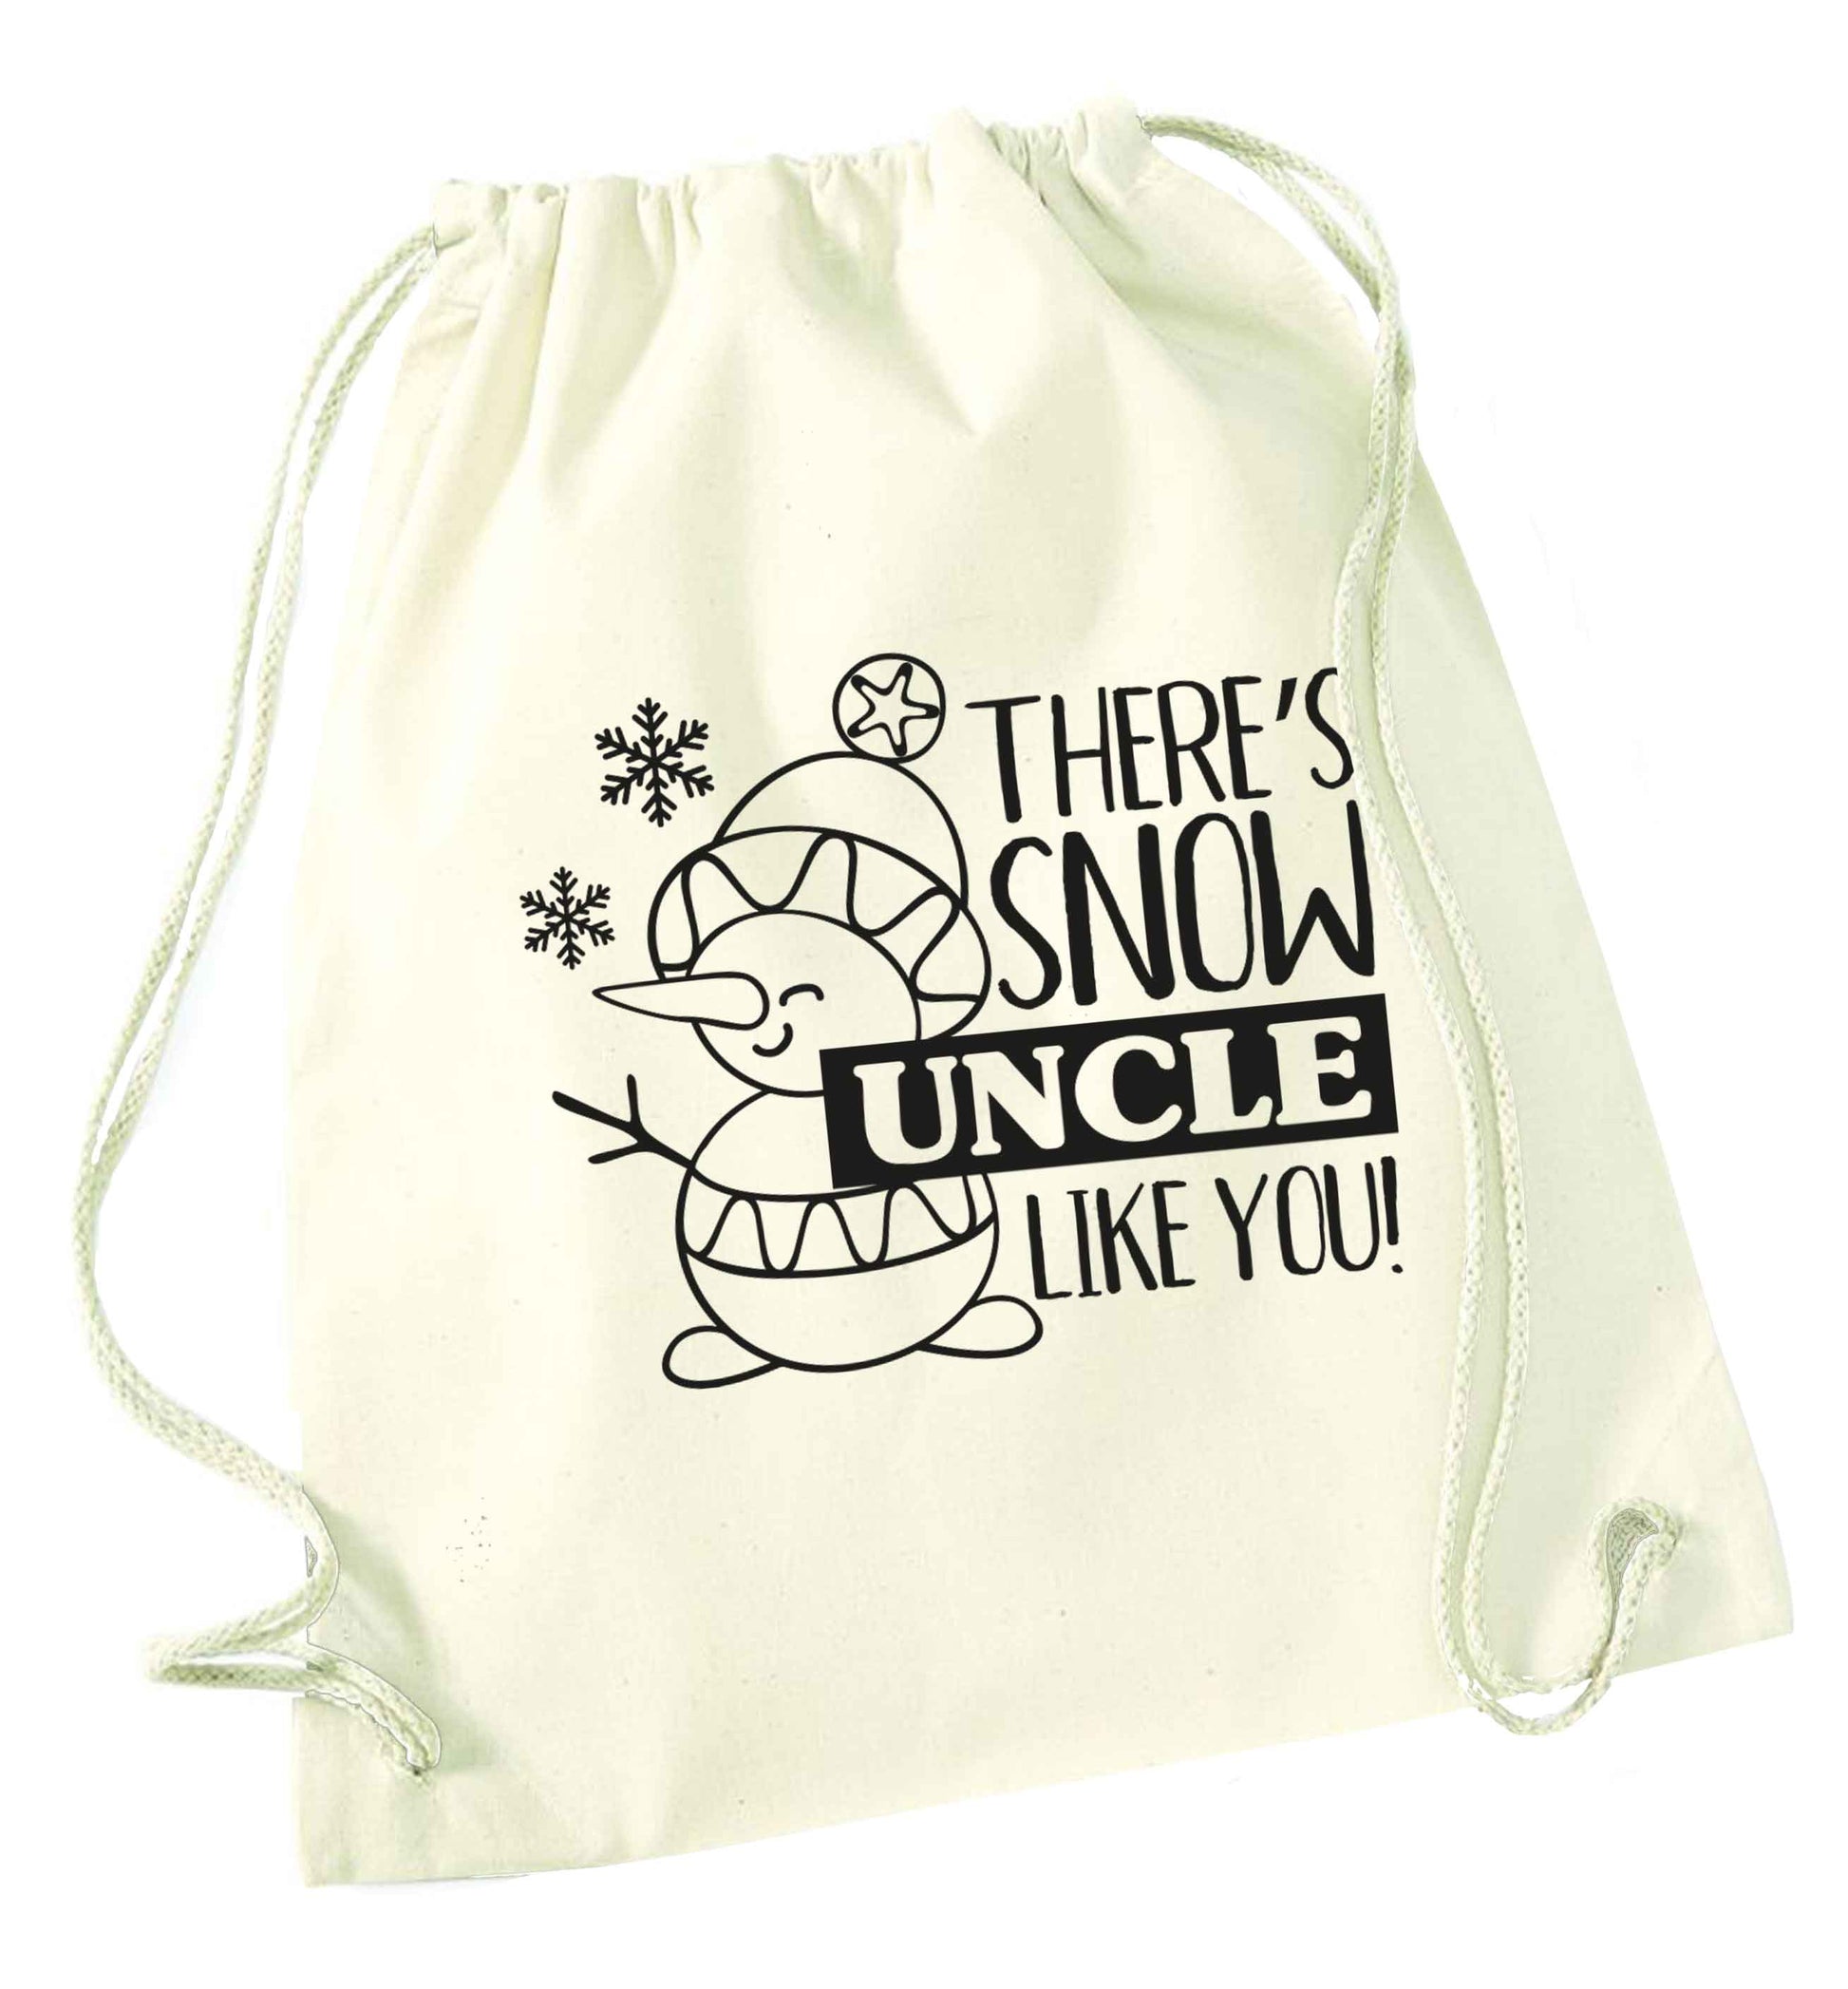 There's snow uncle like you natural drawstring bag